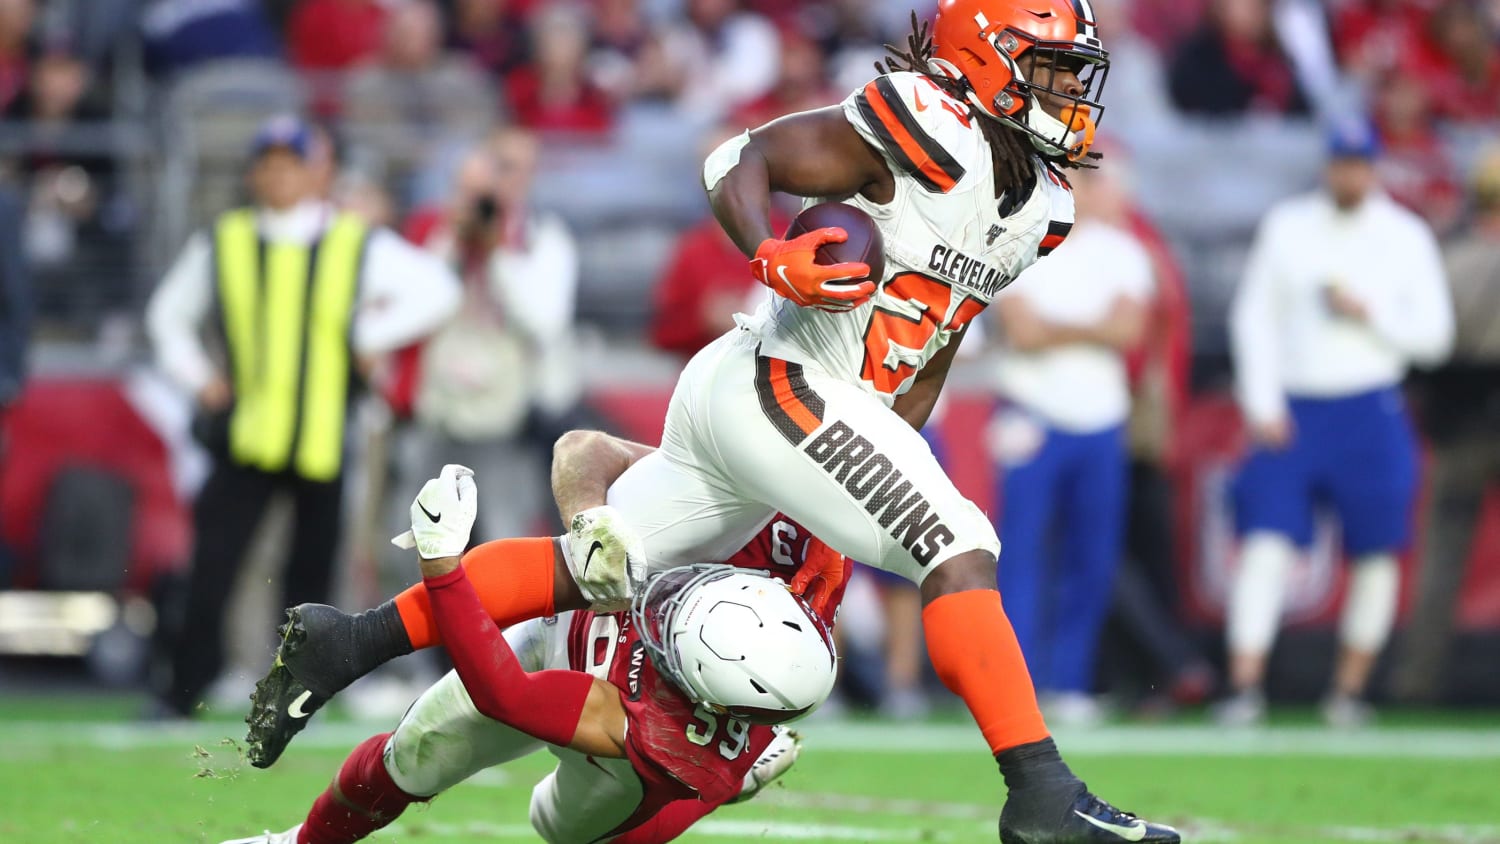 Police found marijuana in car of Cleveland Browns RB Kareem Hunt after traffic stop